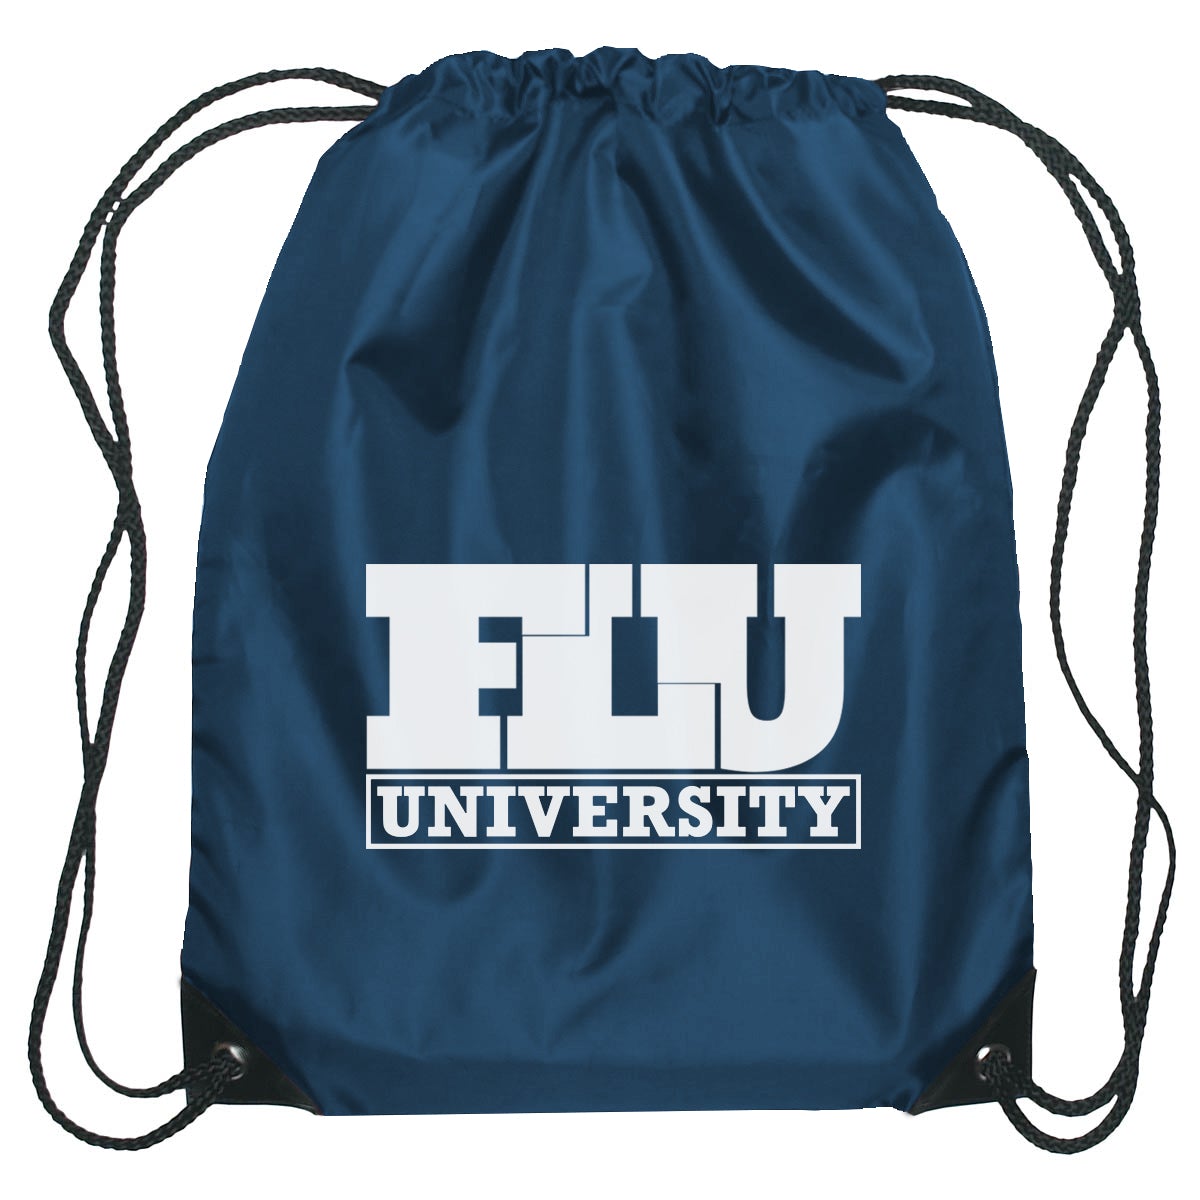 Small Hit Sports Pack Drawstring Bags Hit Promo Navy Single Color